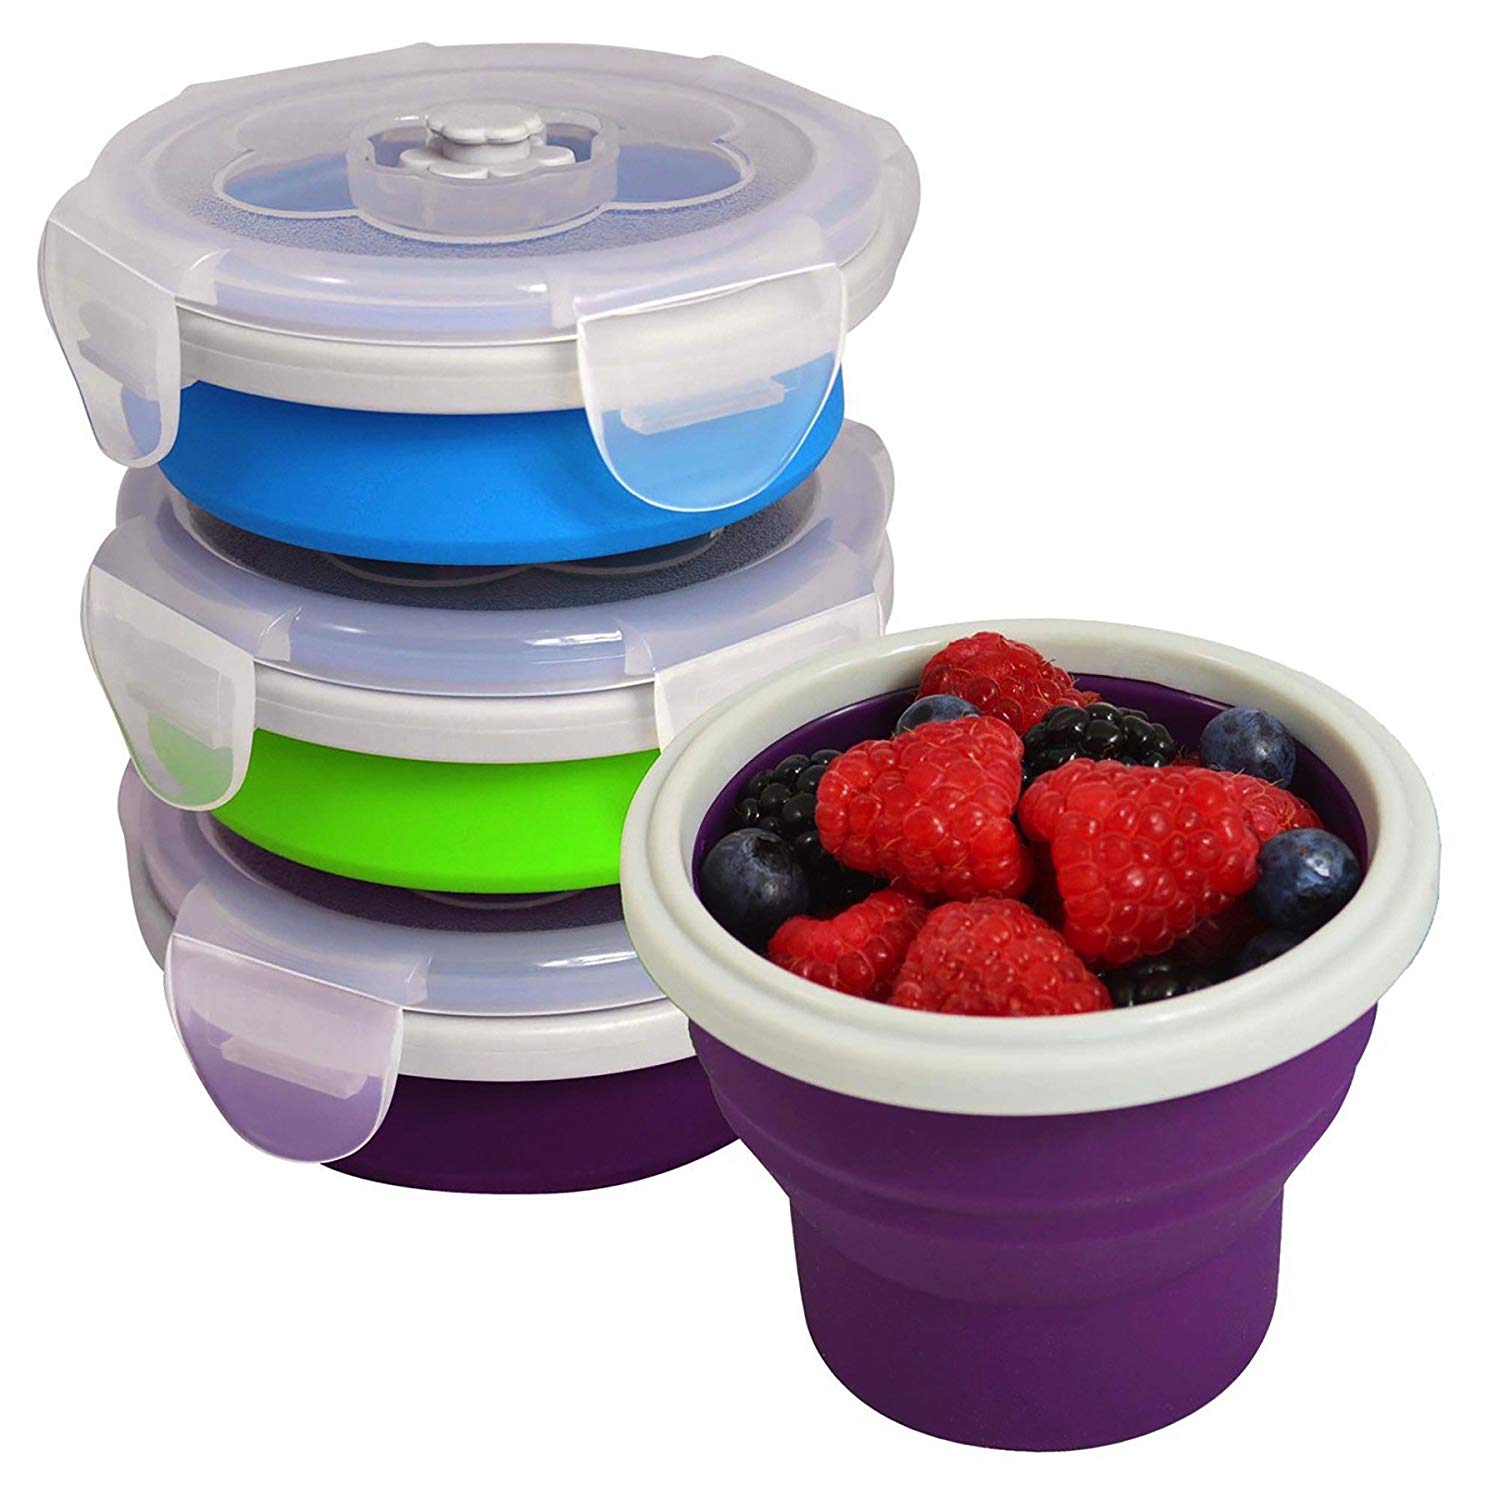 EcoVessel Snacker Collapsible Silicone Snack Box and Food Container - 8 Ounces, $19 @amazon.com